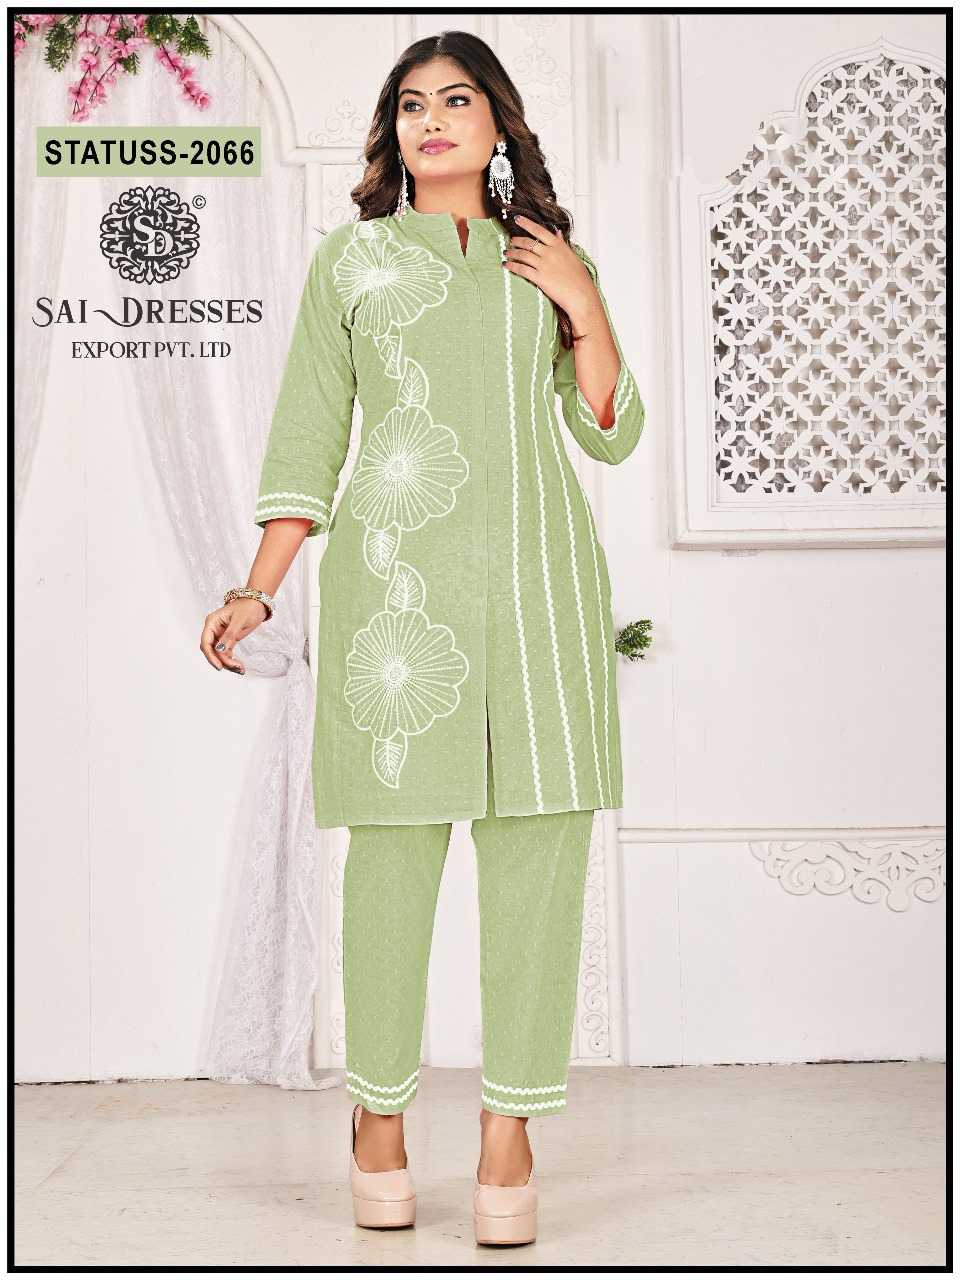 SAI DRESSES PRESENT D.NO SD 5039 READY TO WEAR ROMAN SILK DESIGNER FESTIVE KURTI WITH PANT COMBO COLLECTION IN WHOLESALE RATE IN SURAT